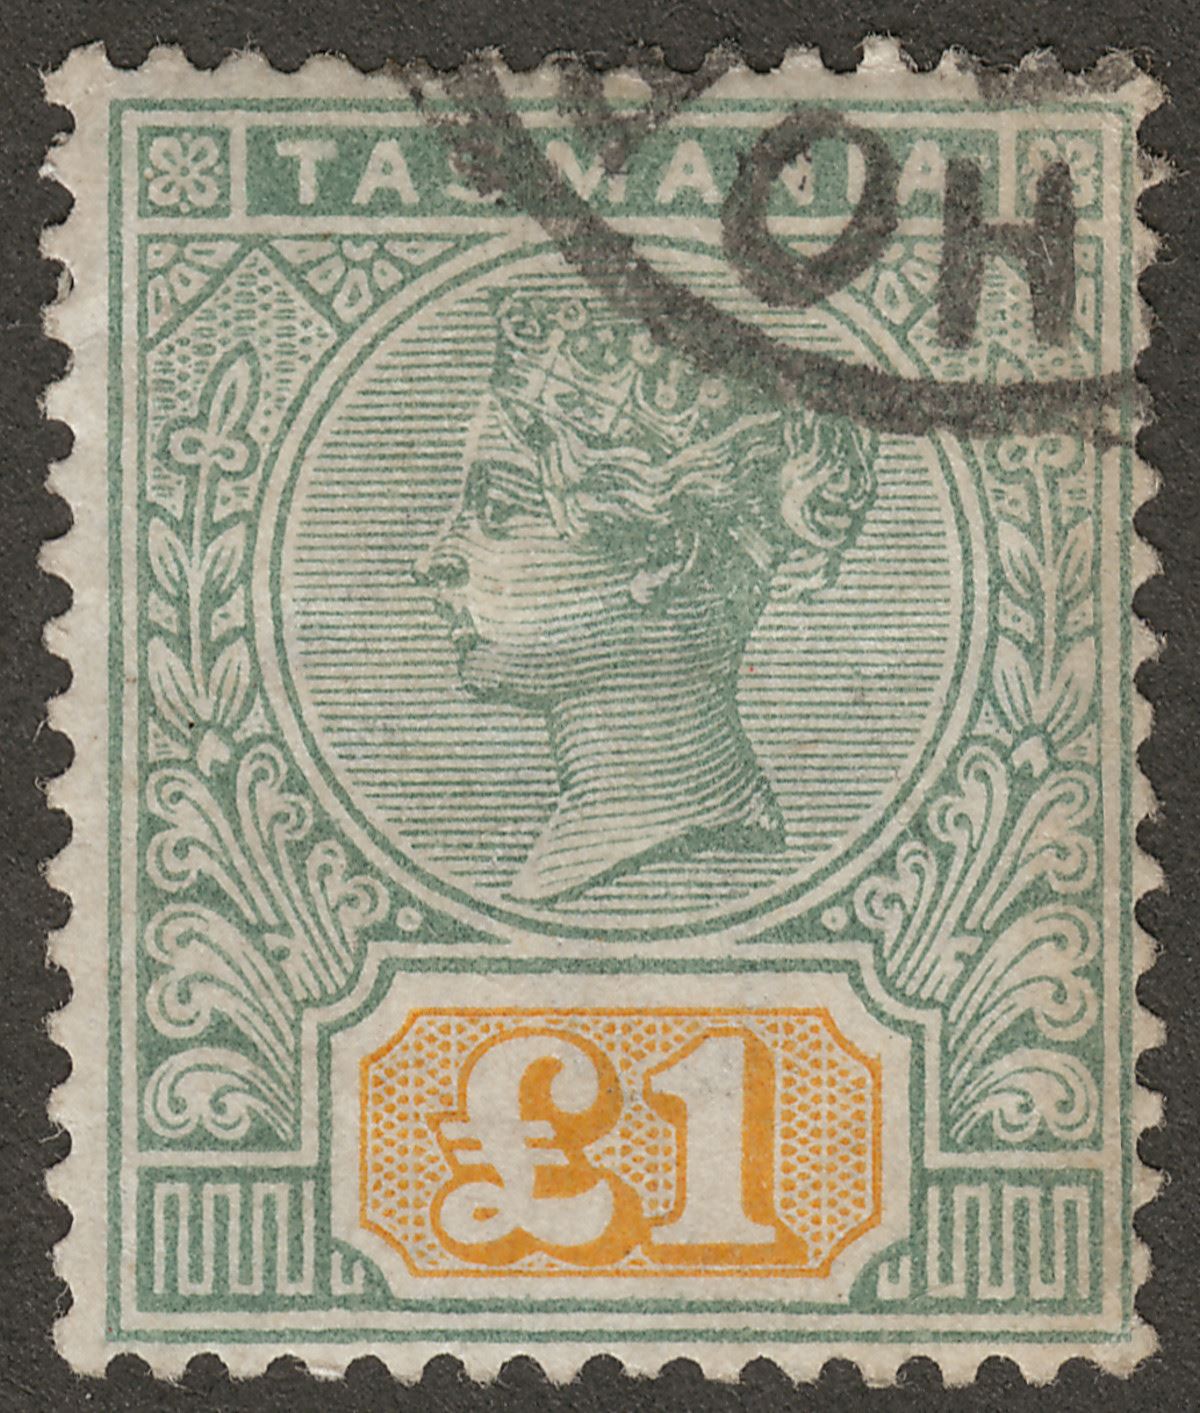 Tasmania 1897 Queen Victoria £1 Green and Yellow Used* SG225